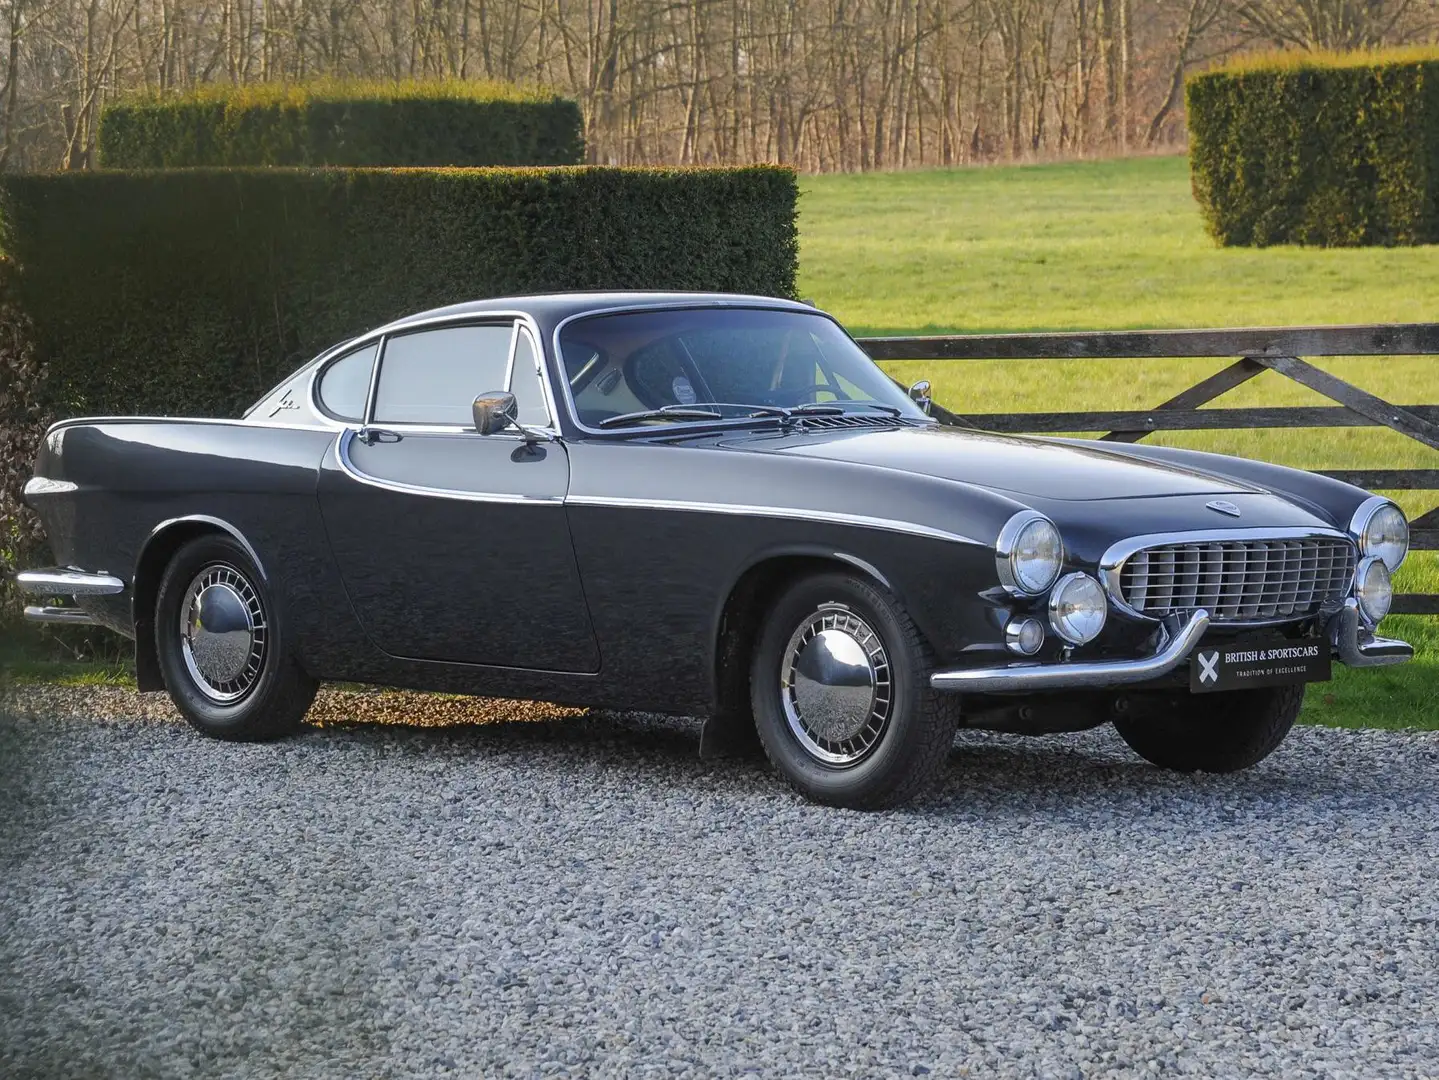 Volvo P1800 Restored - First year of production siva - 1